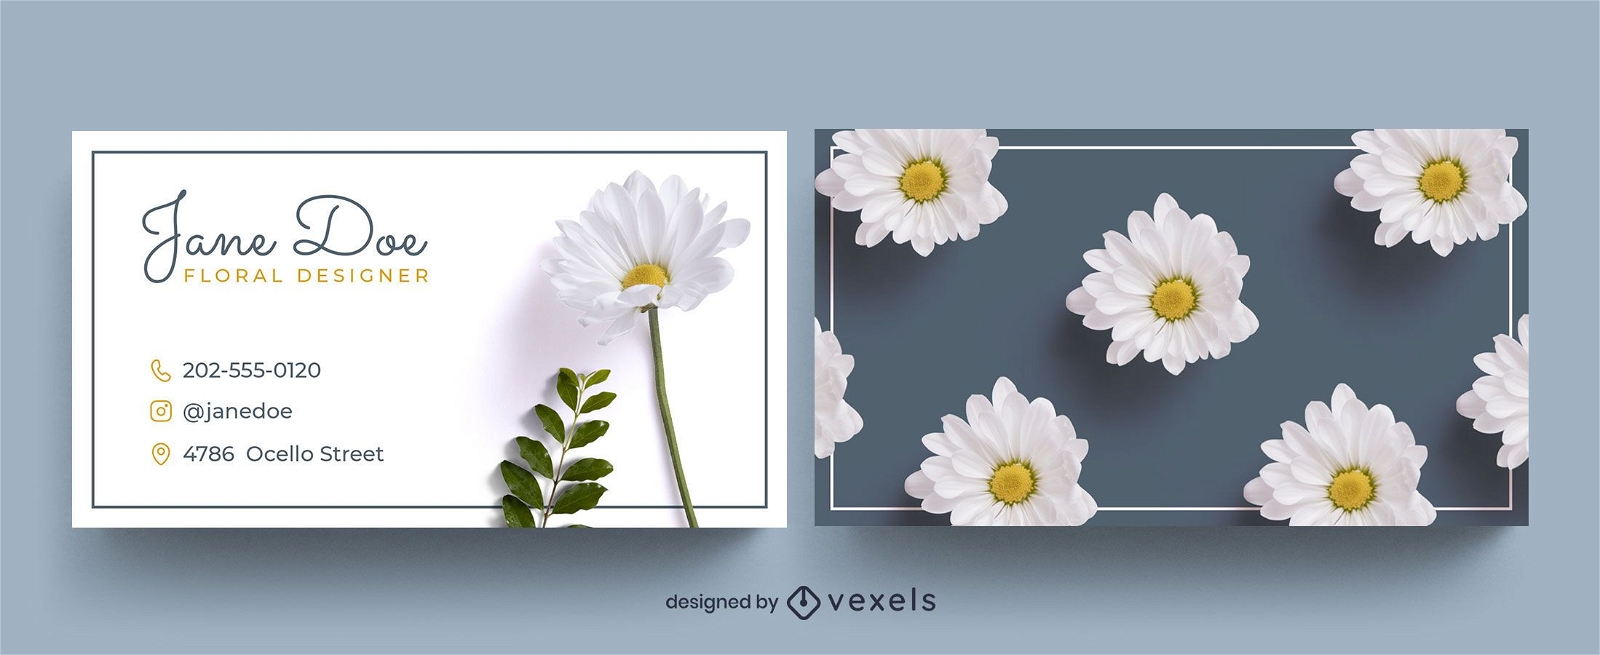 Business card template photographic flower pattern